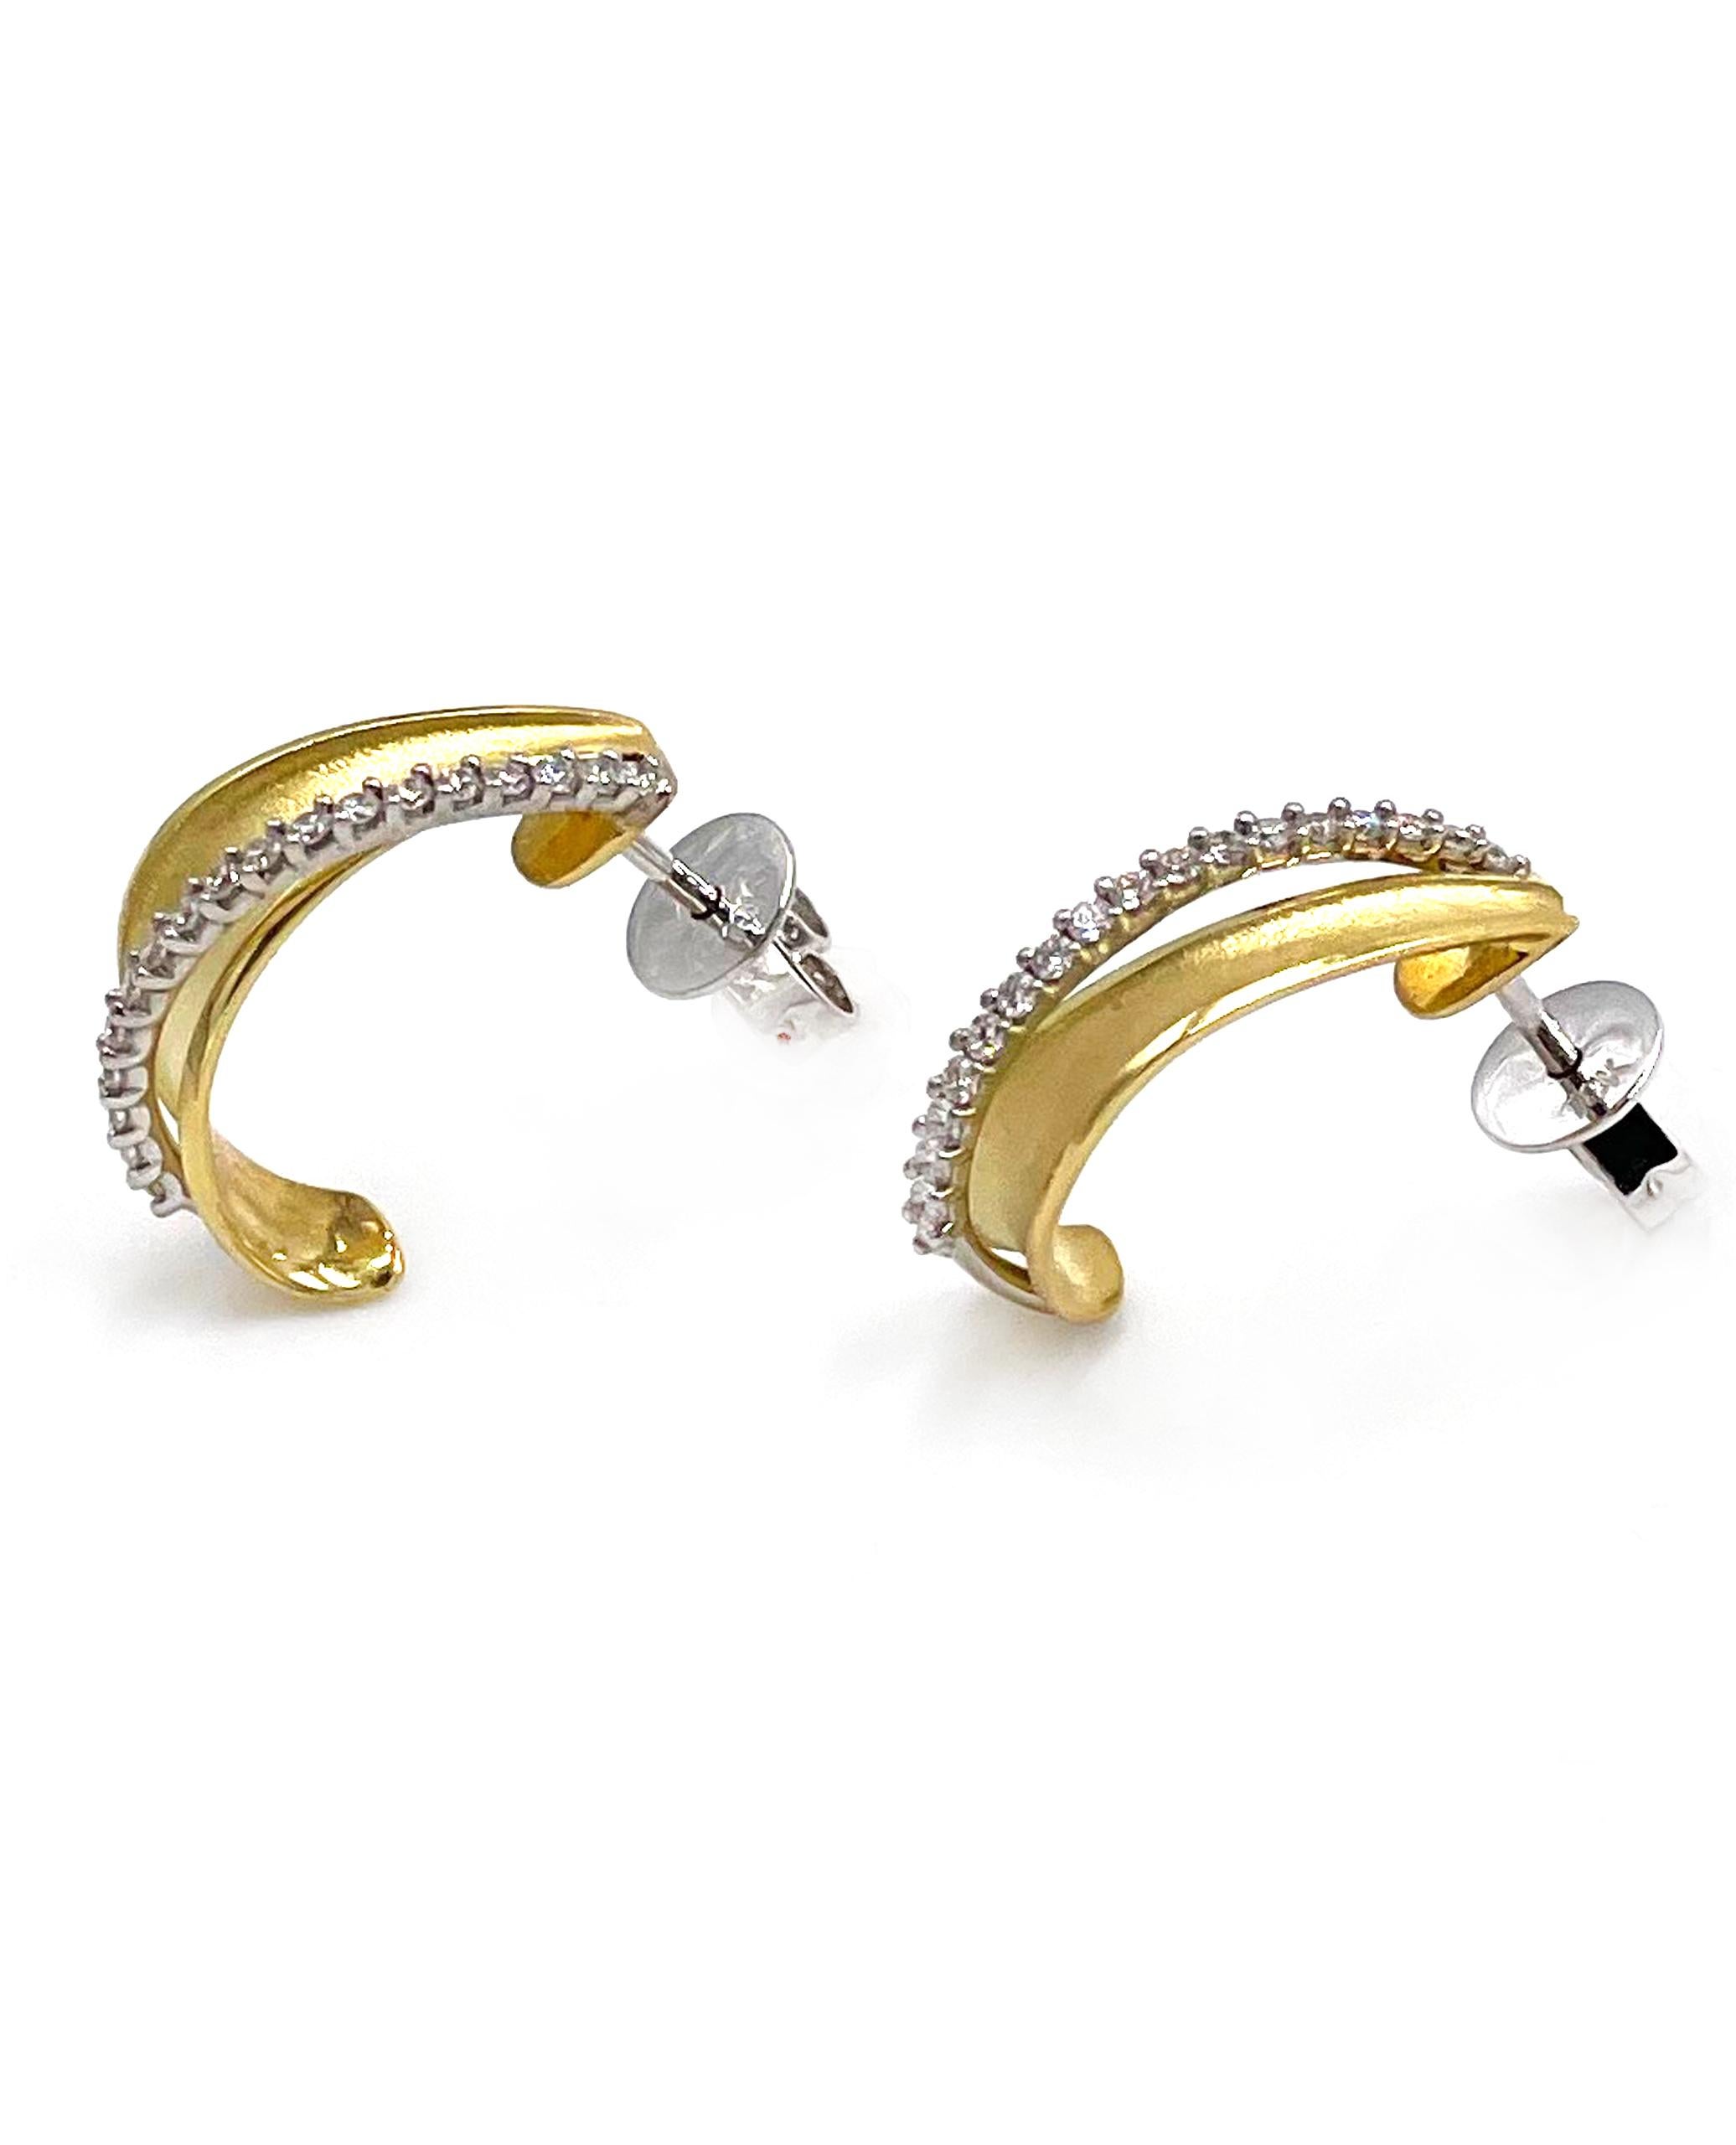 Contemporary Simon G. NE188 18K Yellow and White Gold Earrings with 0.27 Carat Diamonds For Sale